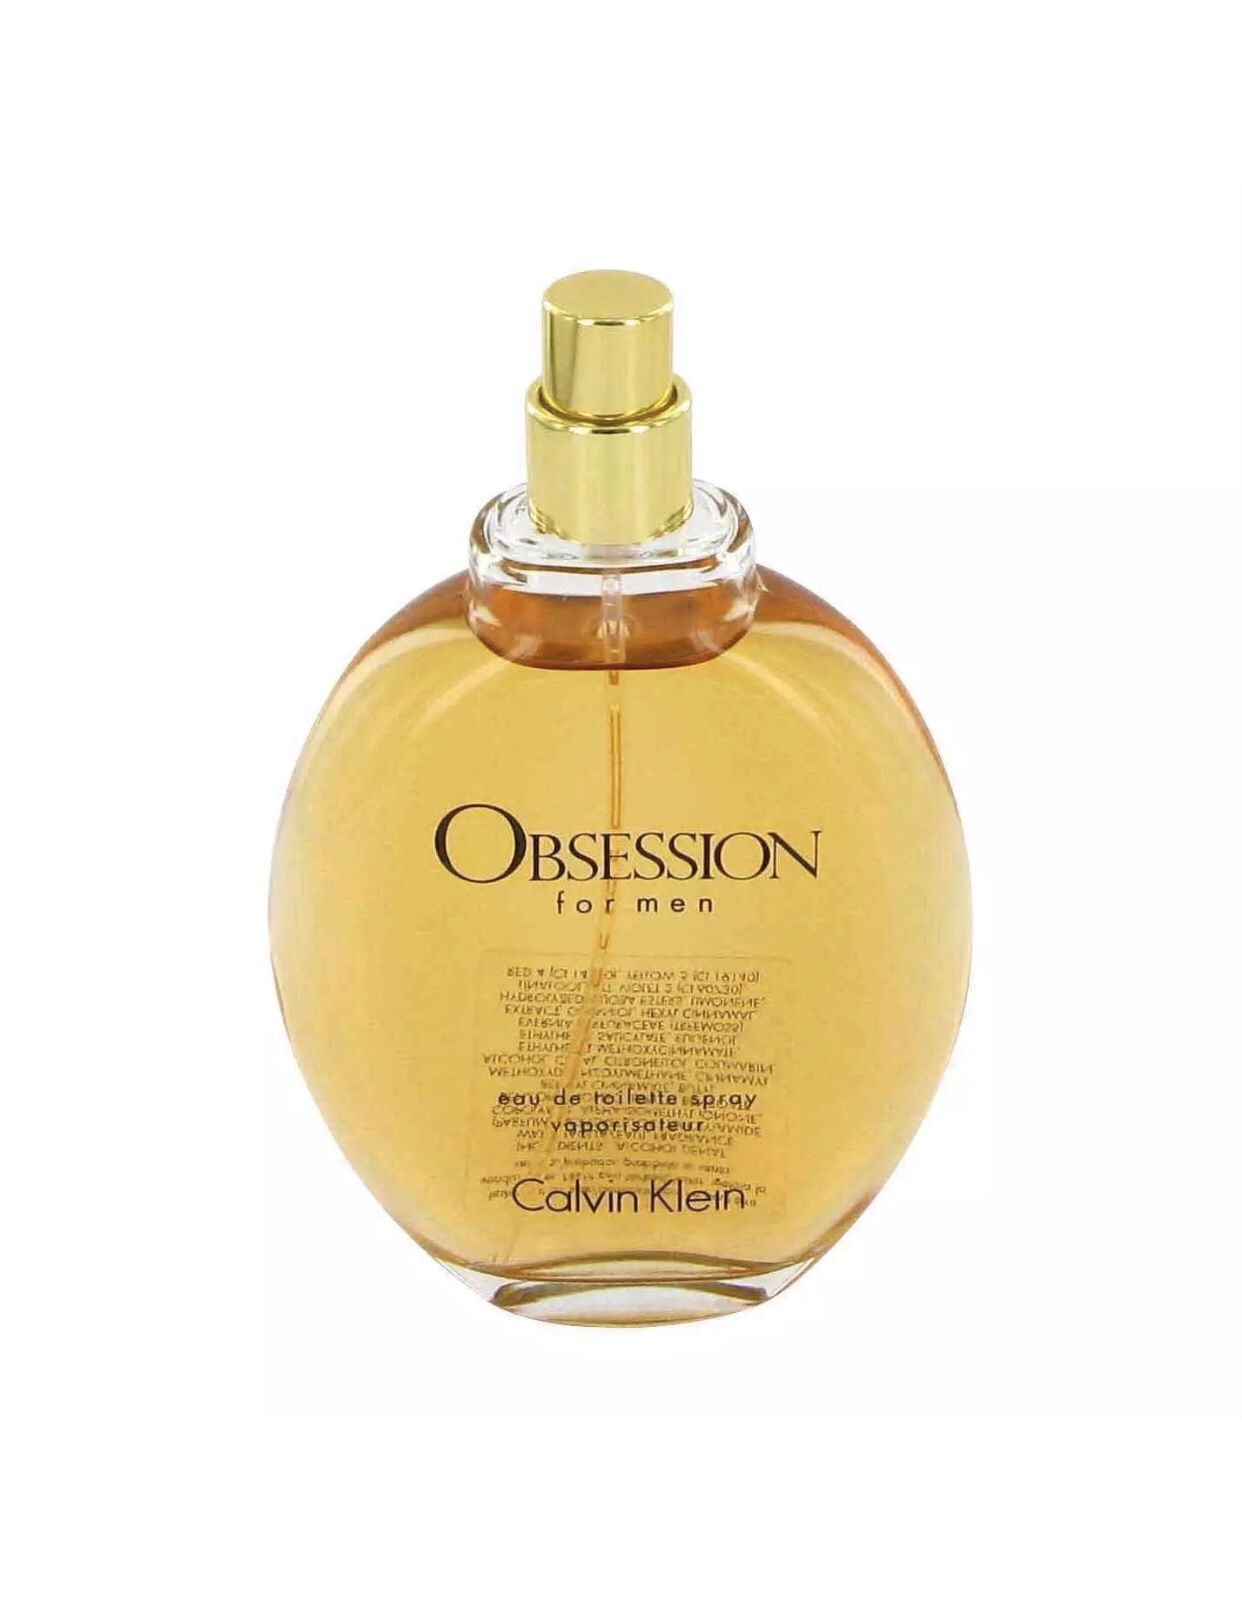 OBSESSION by Calvin Klein CK 4.0 oz edt Cologne New in Box tester